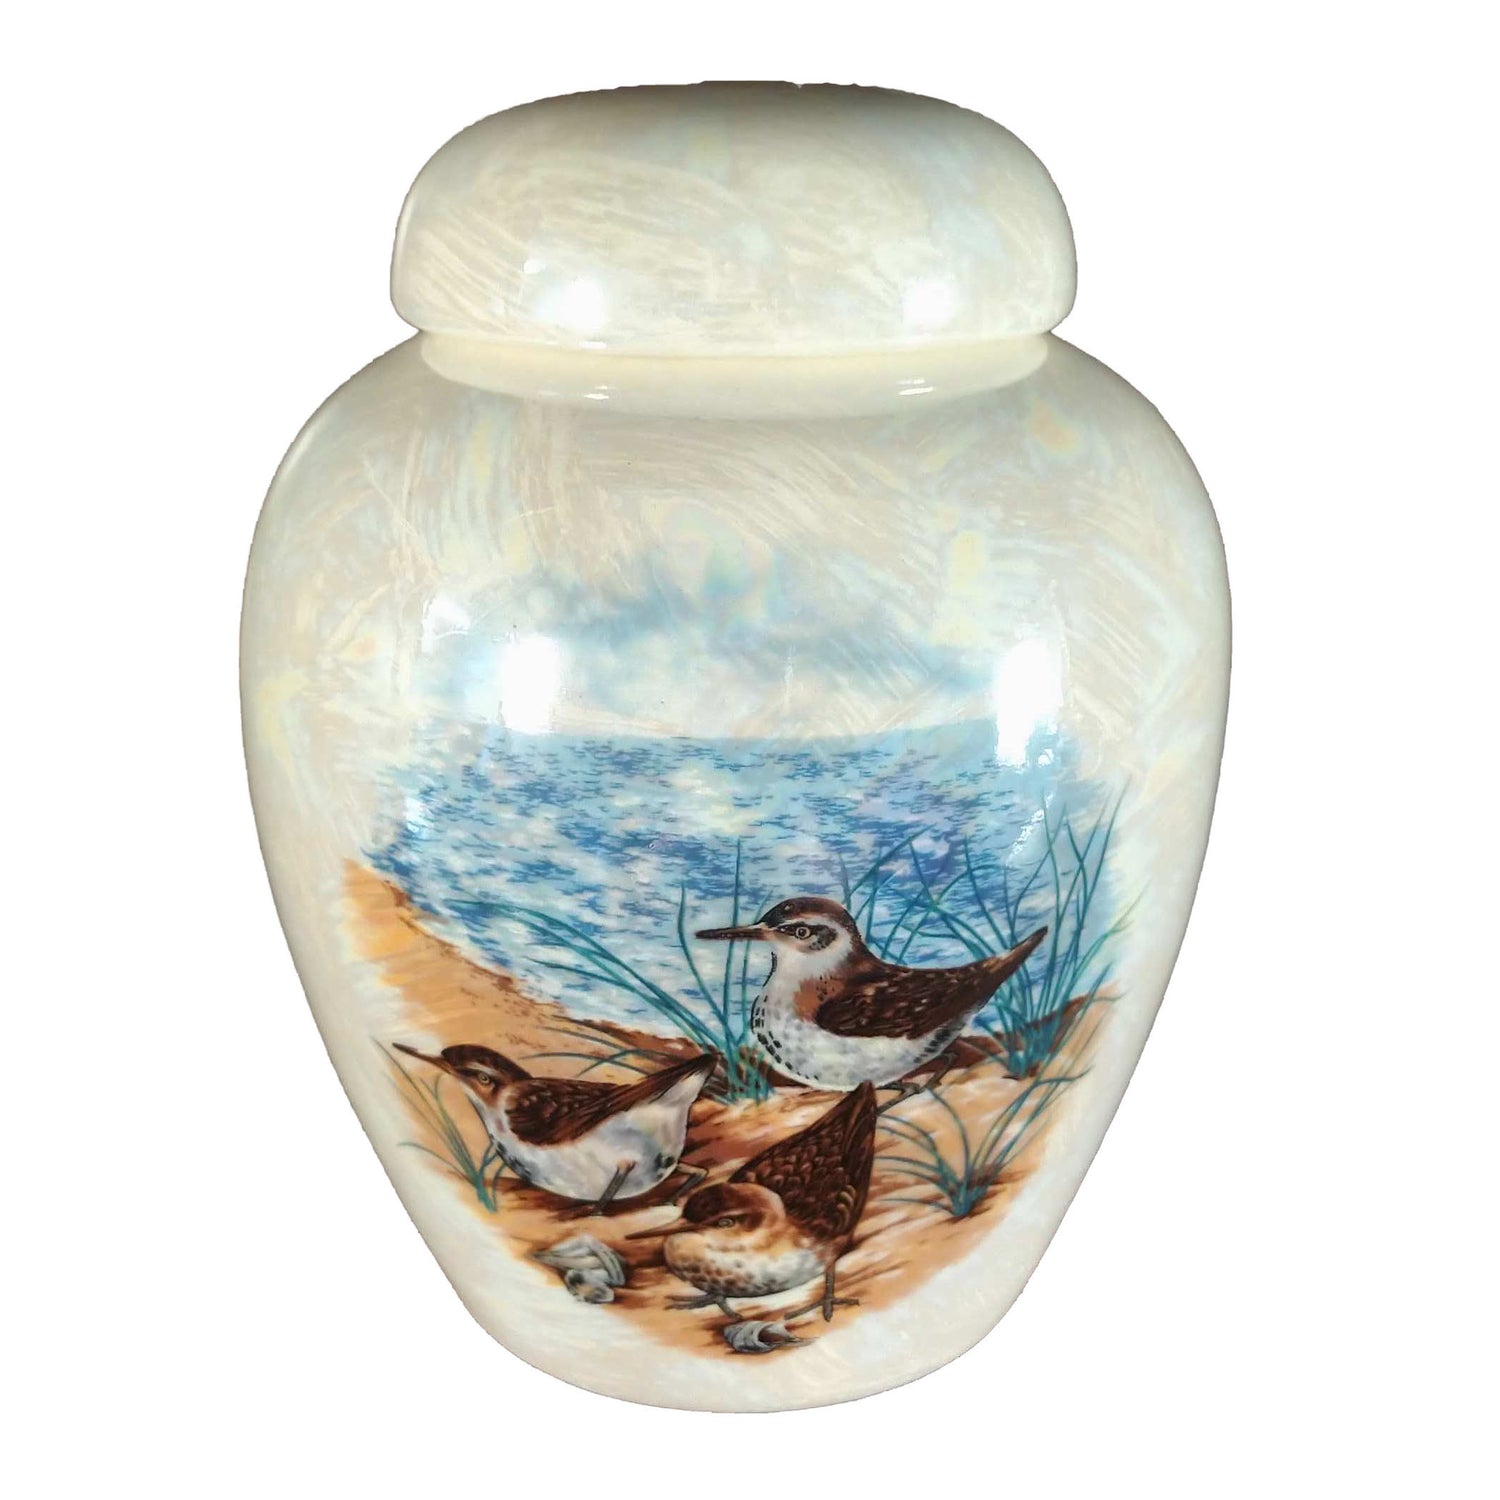 A beautiful small-sized cremation ceramic keepsake urn with a decoration of a group of terns on the shore near a body of water with a mother-of-pearl finish.